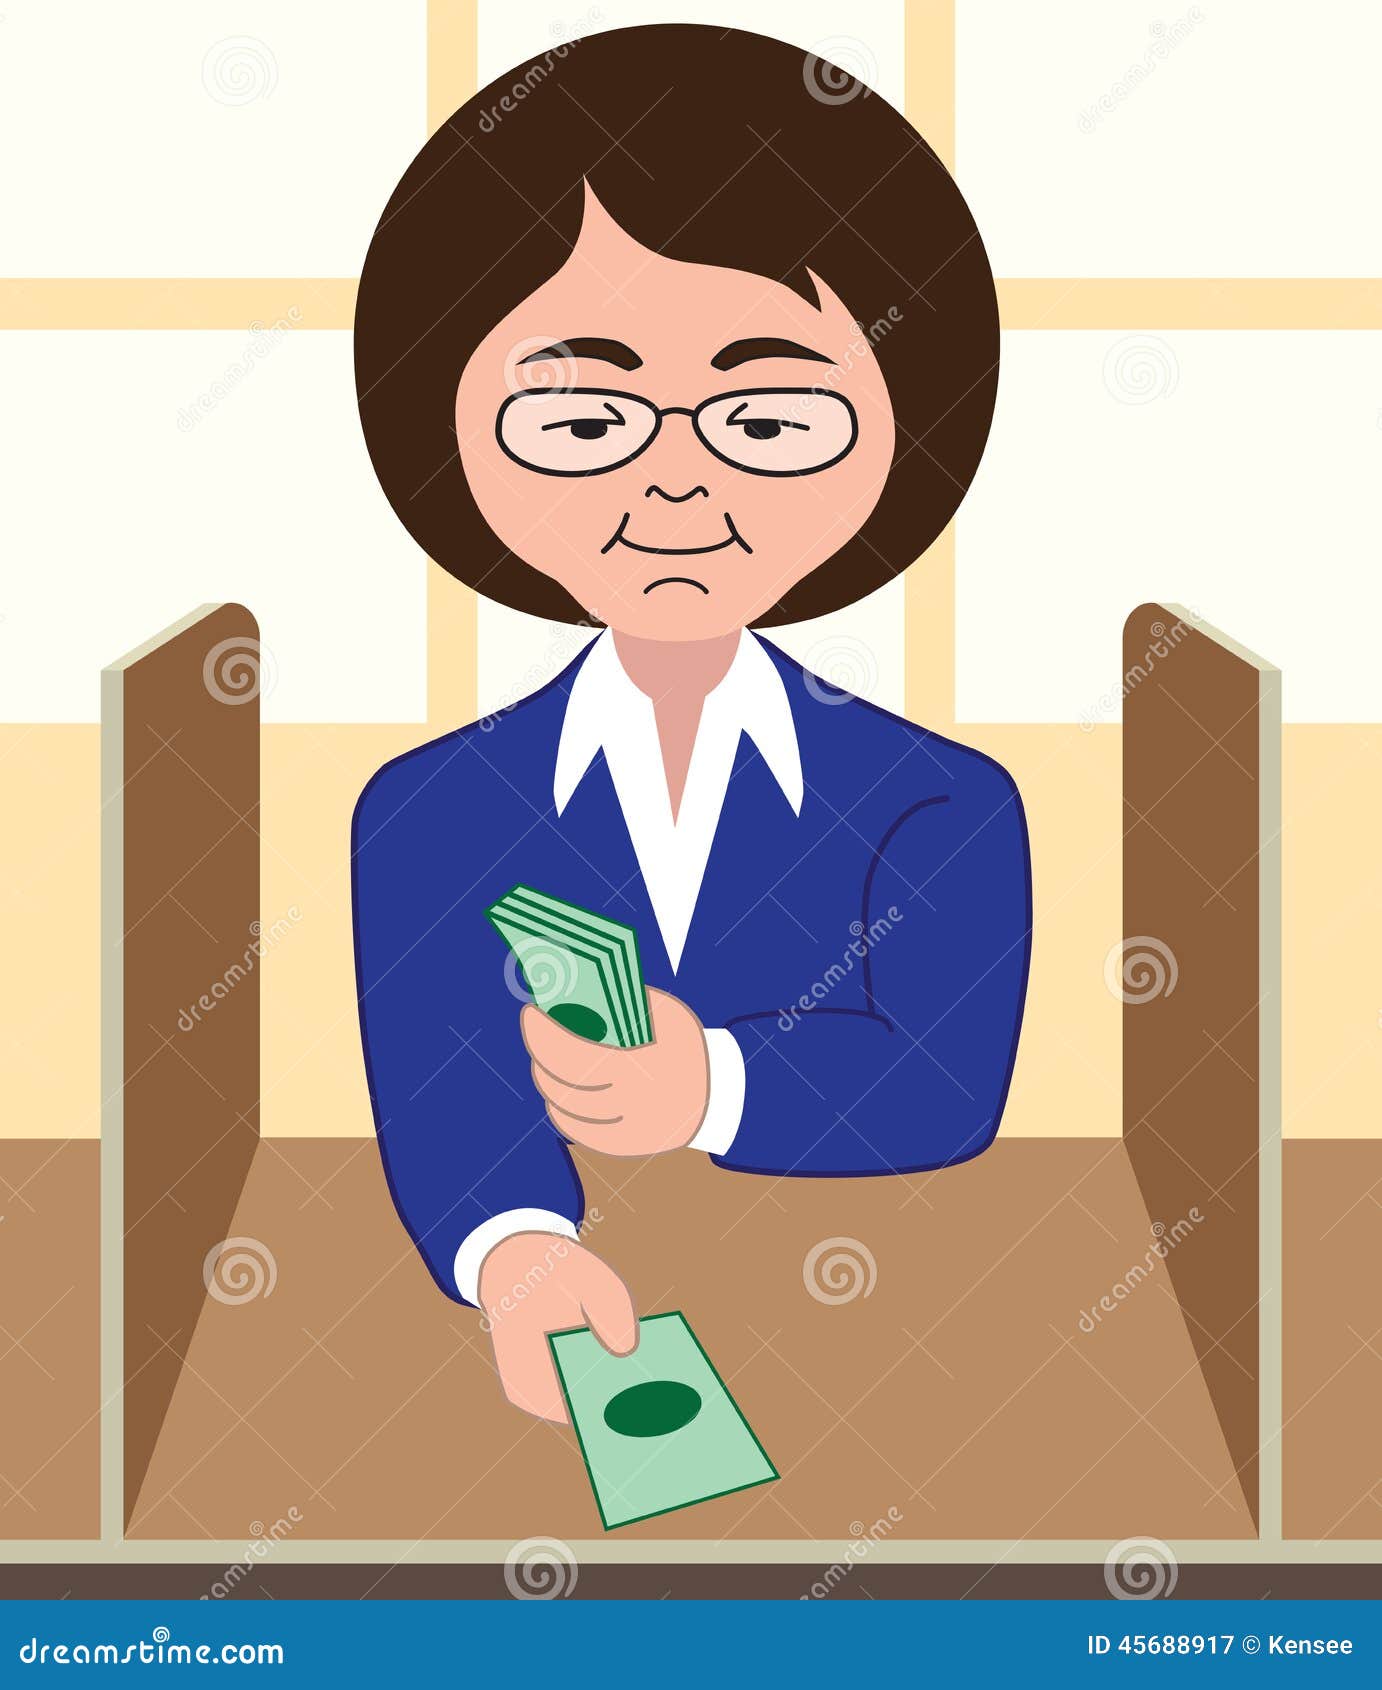 banker clipart - photo #39